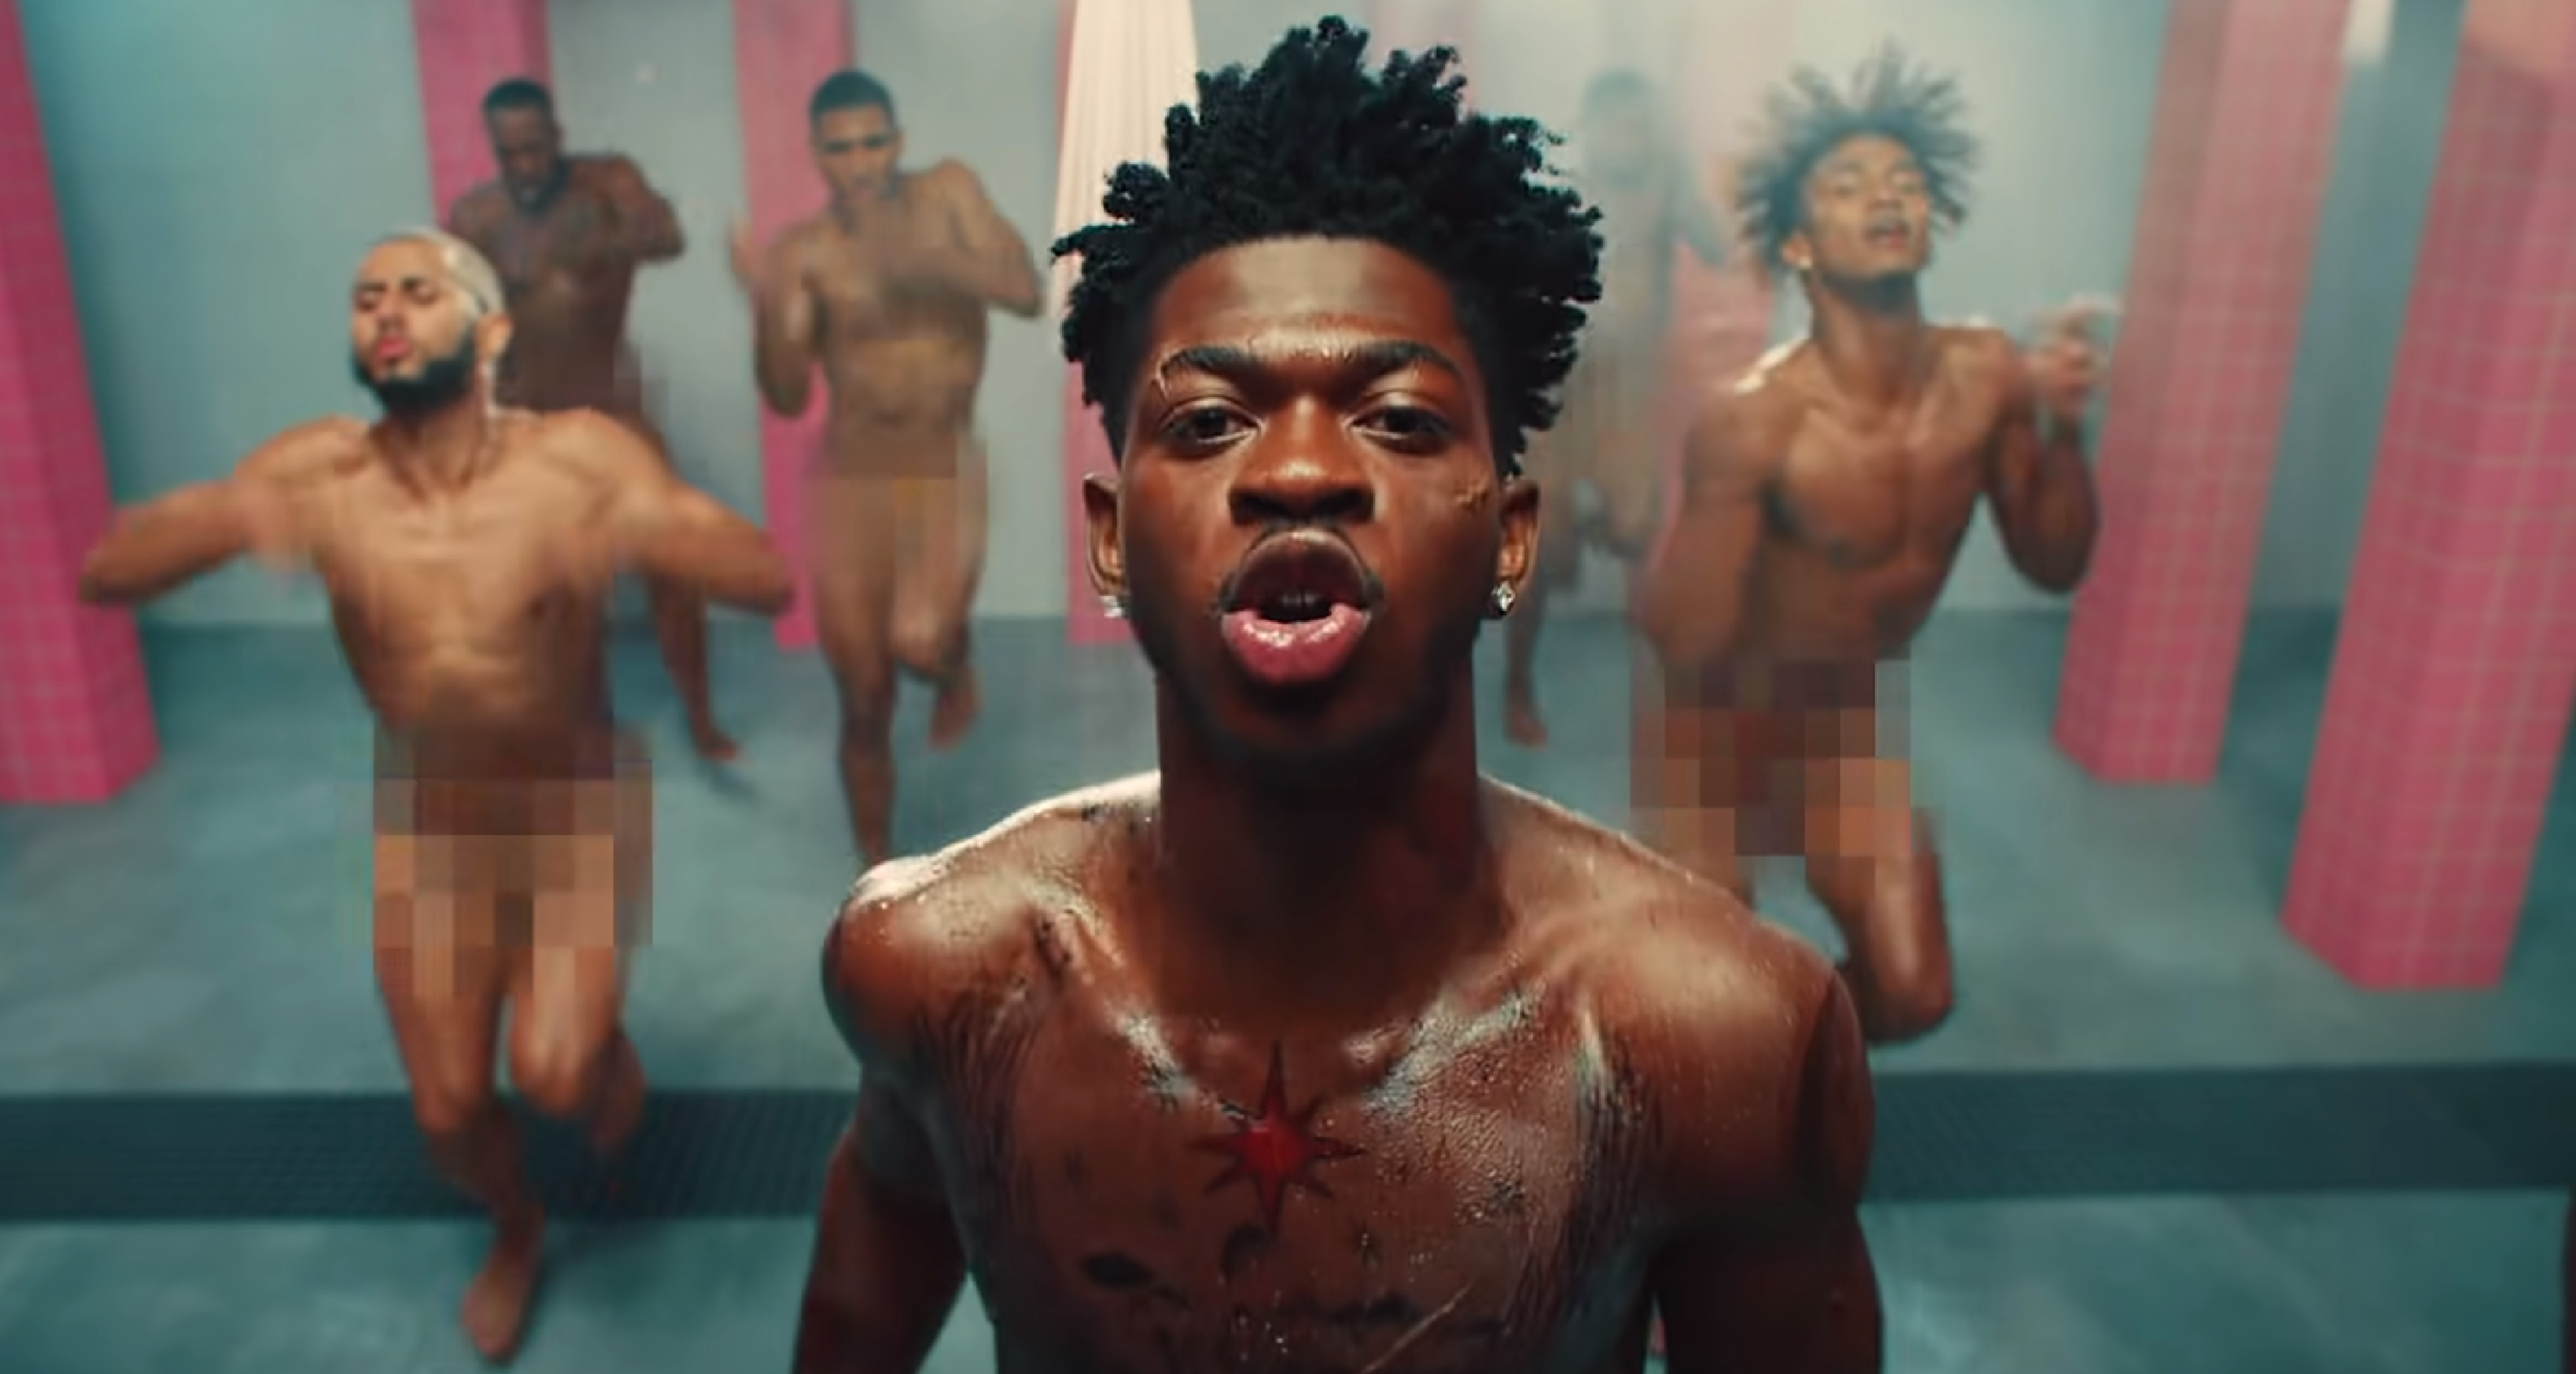 Get a Glimpse of Lil Nas X's Sizzling Sex Appeal with These Photos